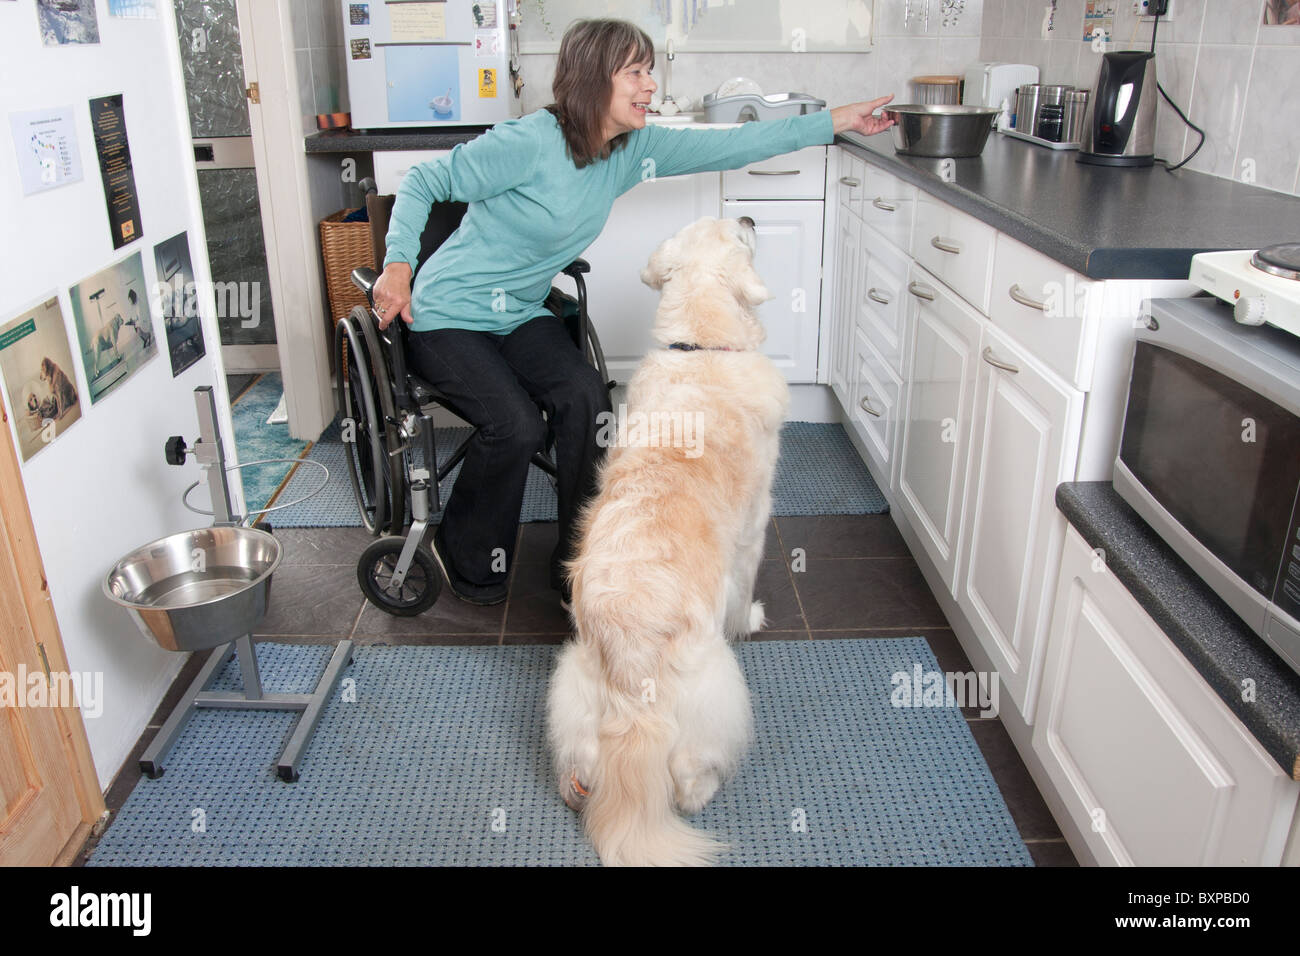 disabled woman in wheelchair preparing food for her dog Stock Photo